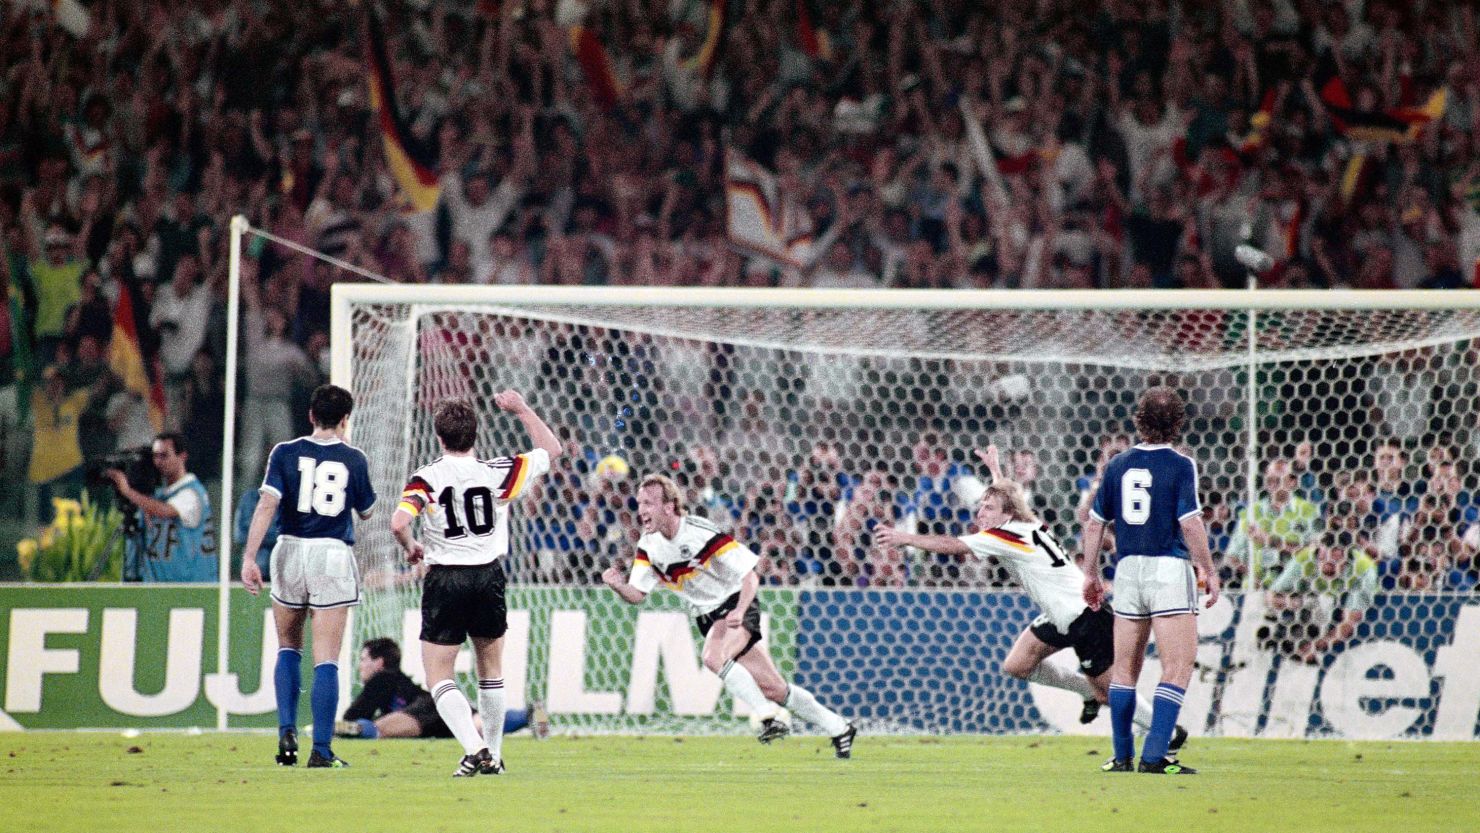 Andreas Brehme celebrates after scoring the winning goal from the penalty spot for West Germany in the 1990 World Cup final against Argentina.